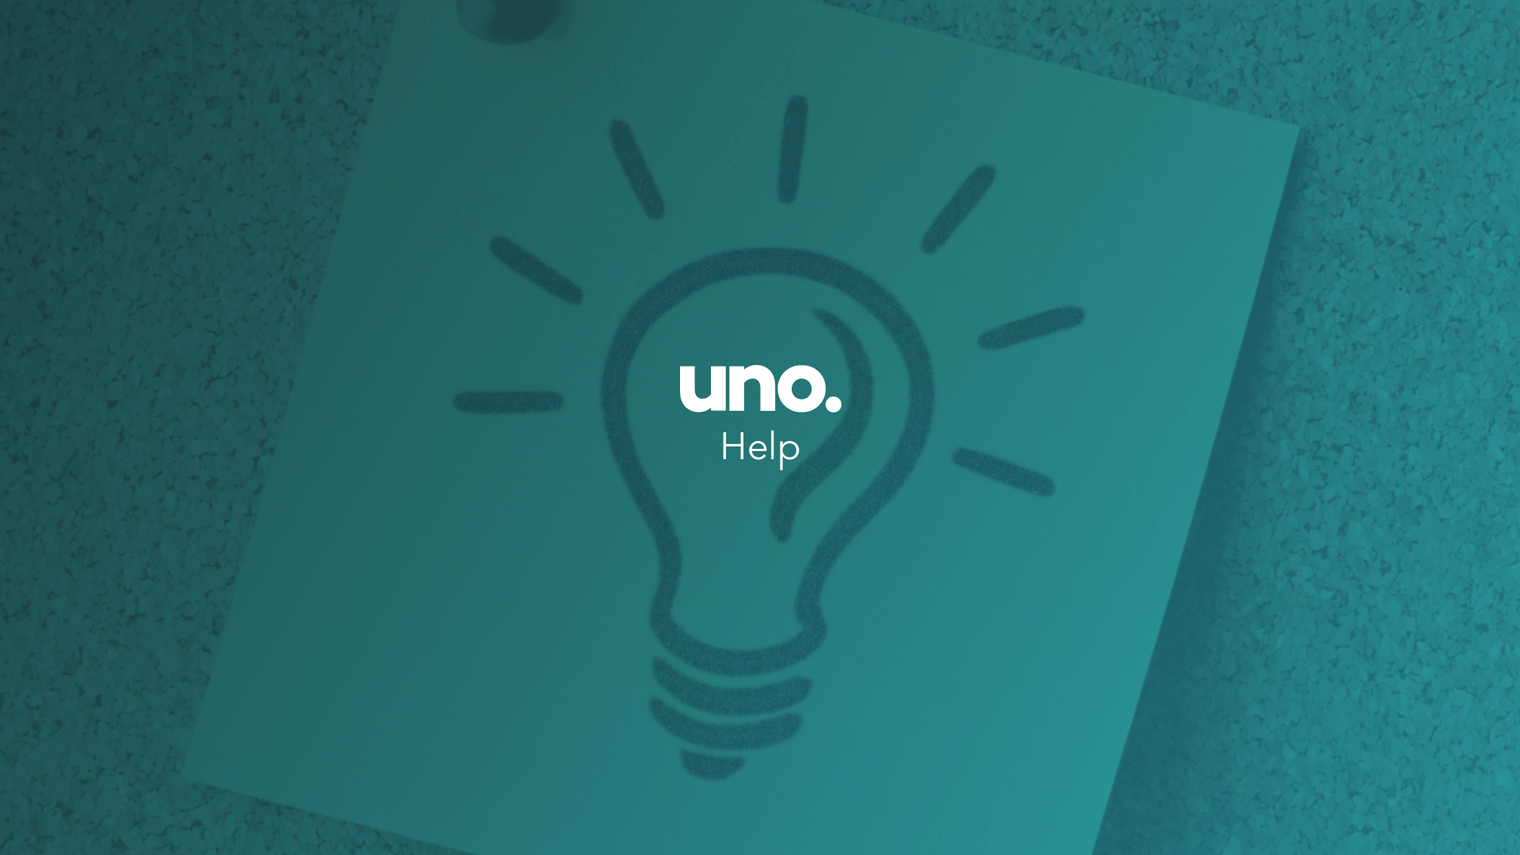 Does uno offer home loans for refinancing?